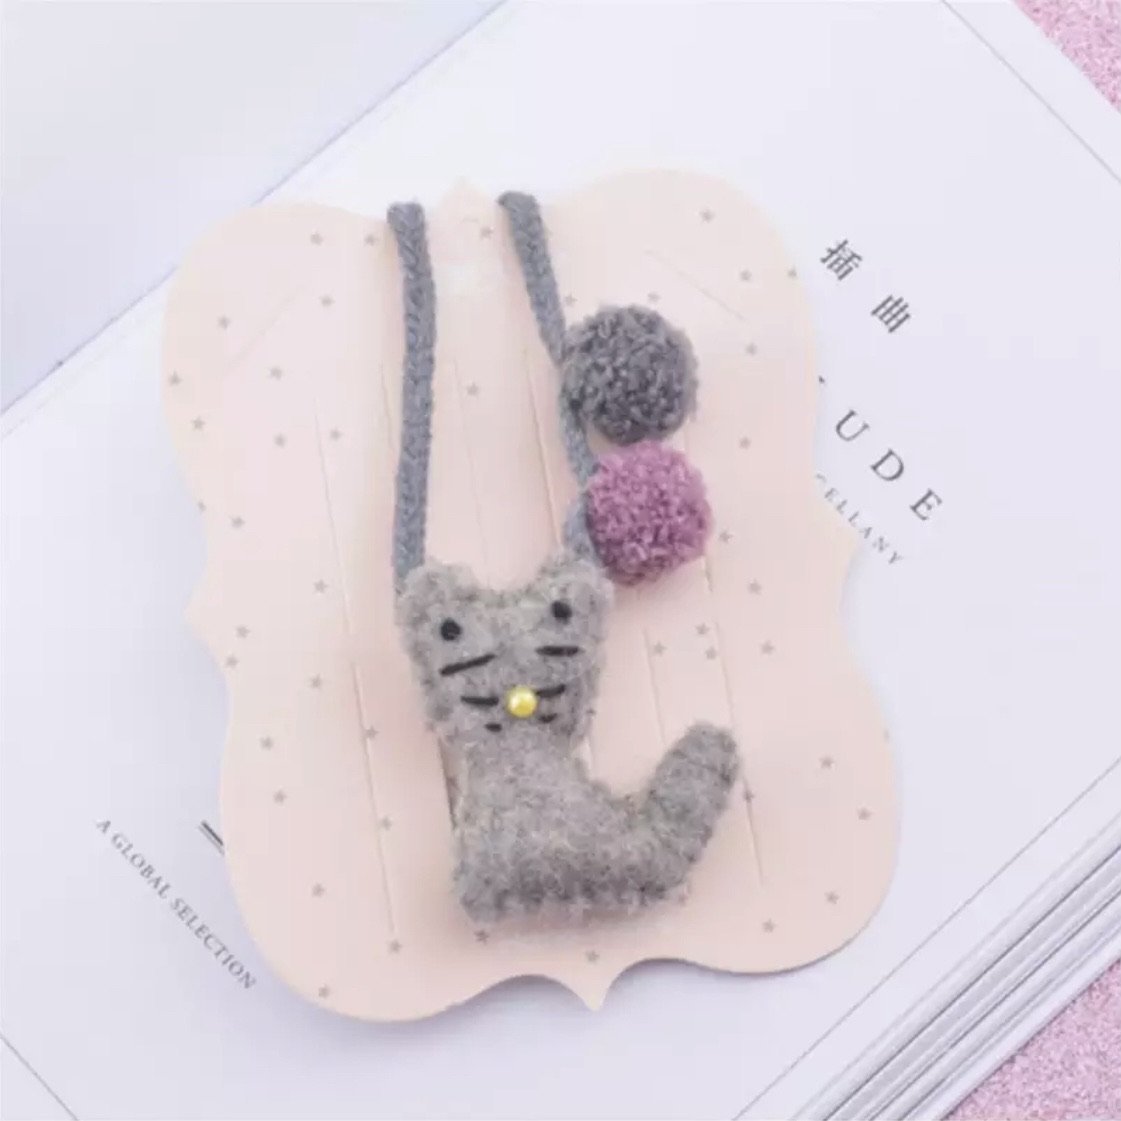 Kitty necklace - Kette find Stylish Fashion for Little People- at Little Foxx Concept Store